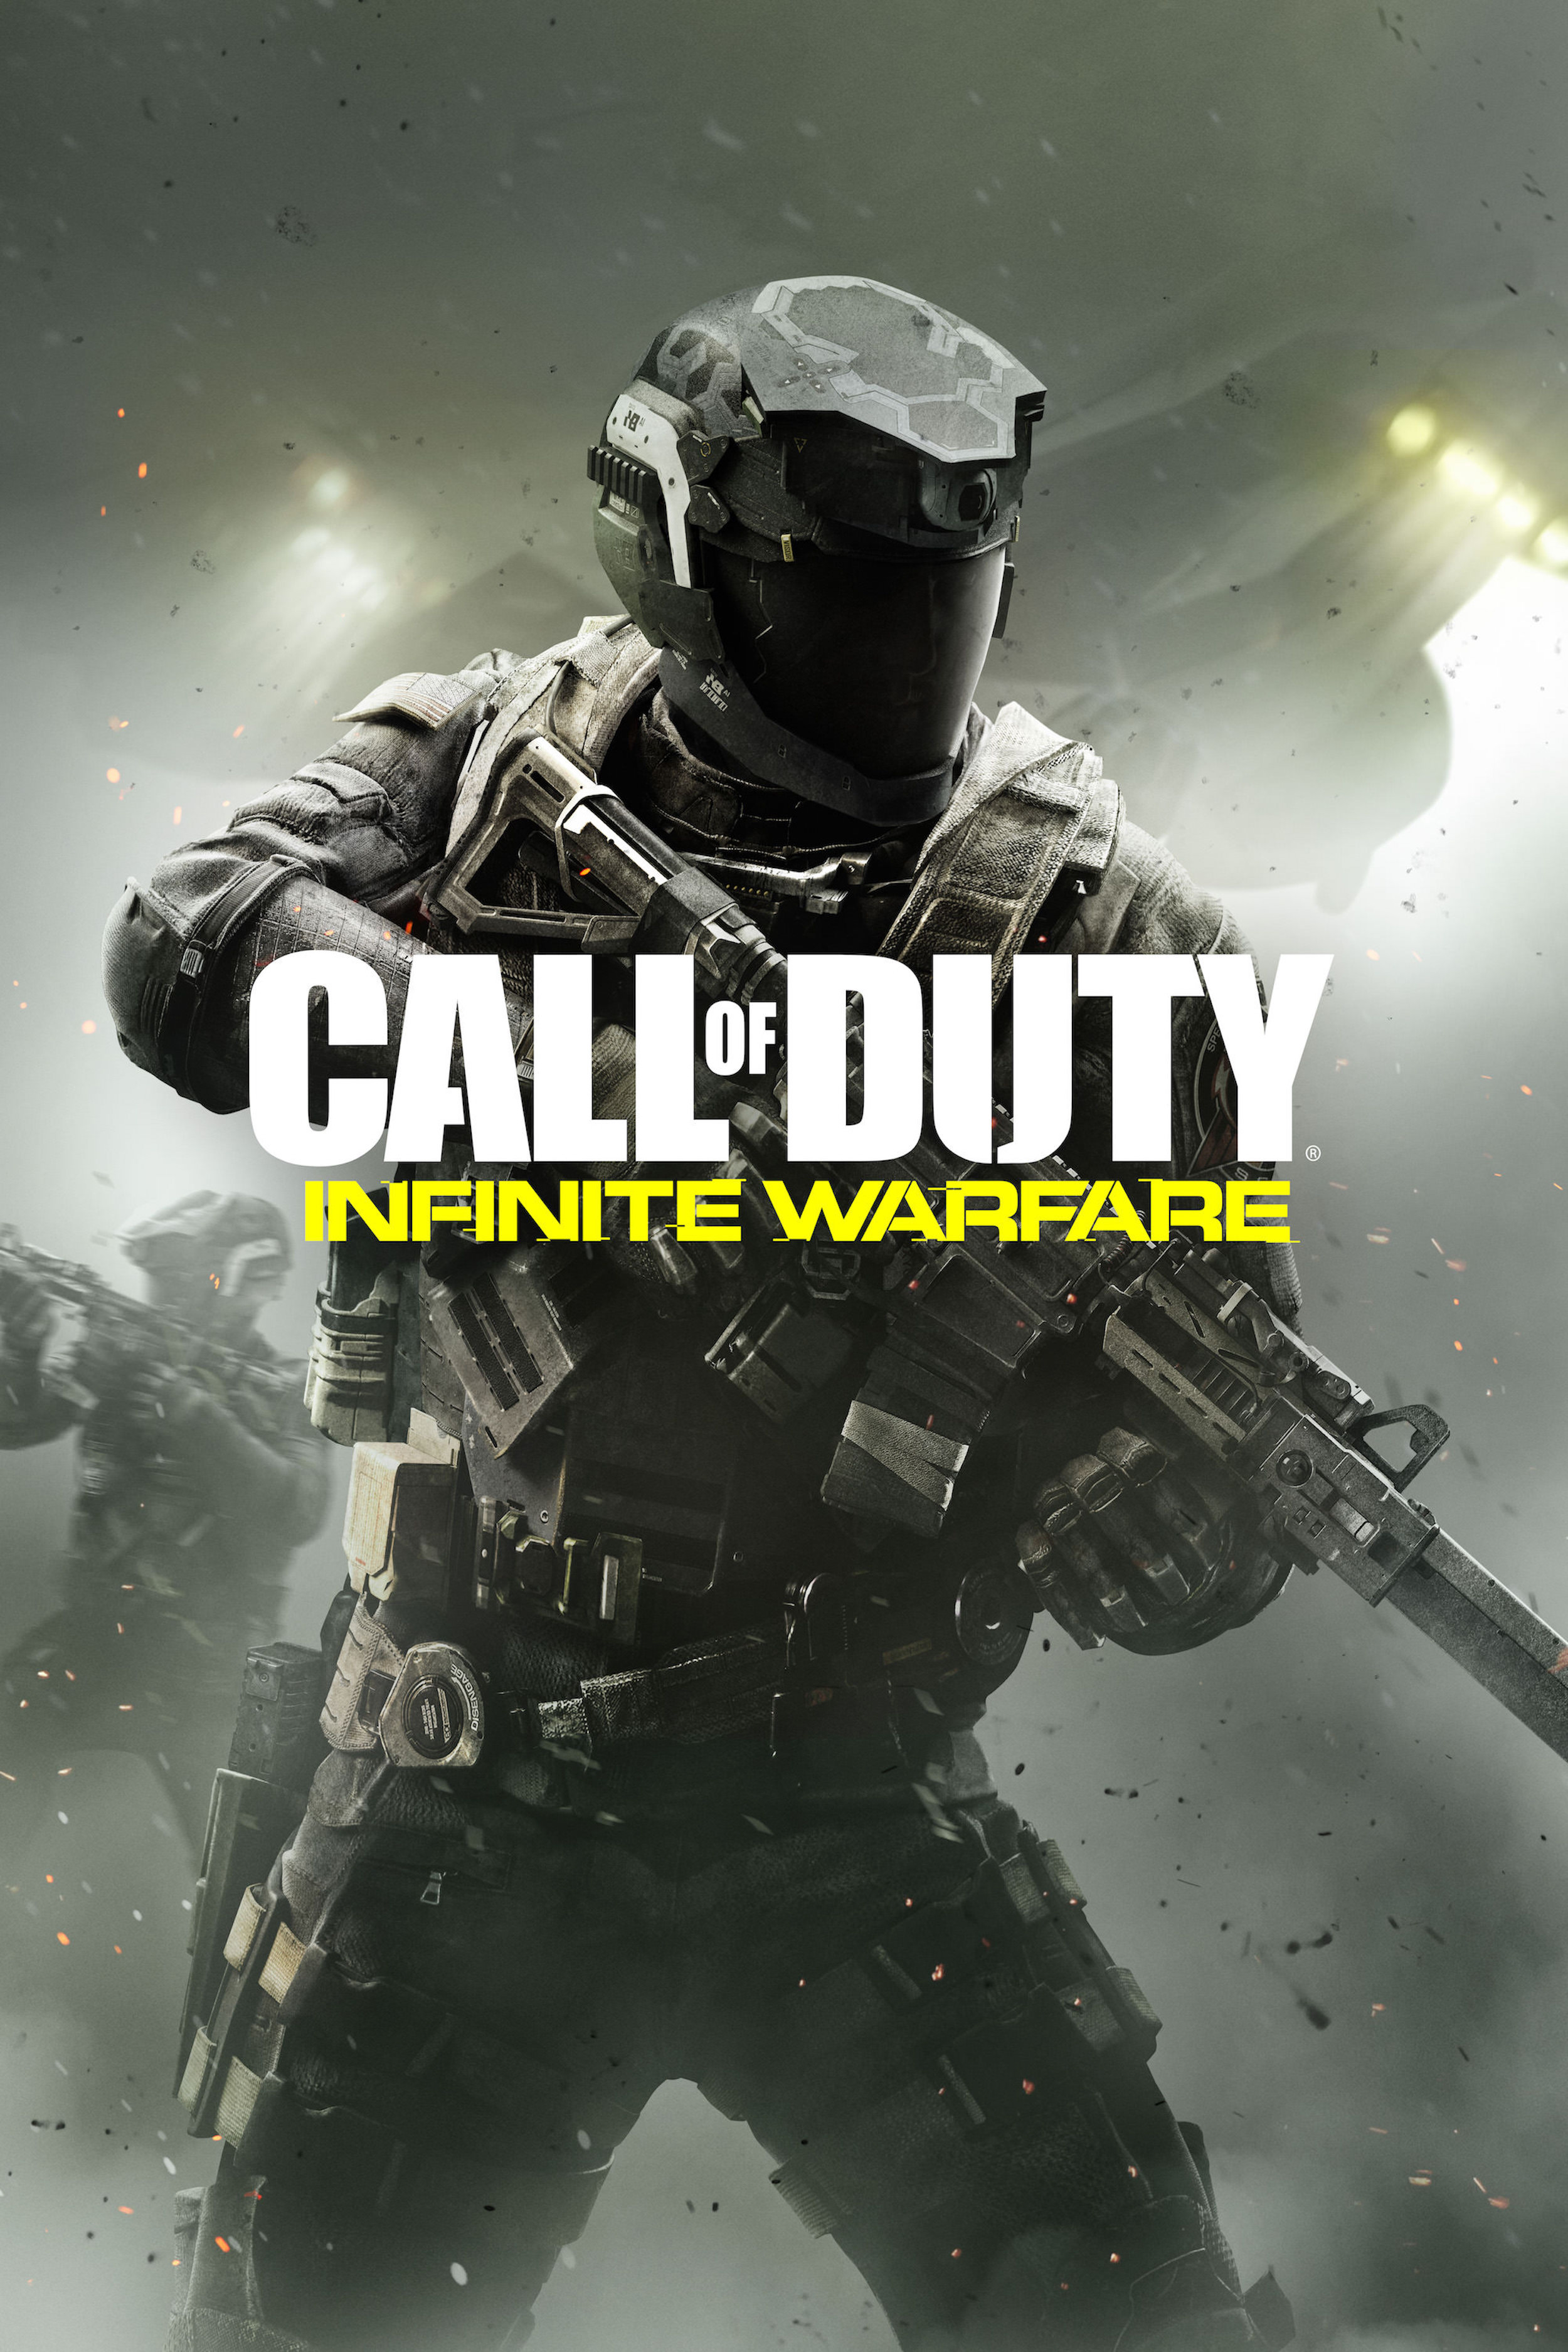 call of duty 3 game torrent